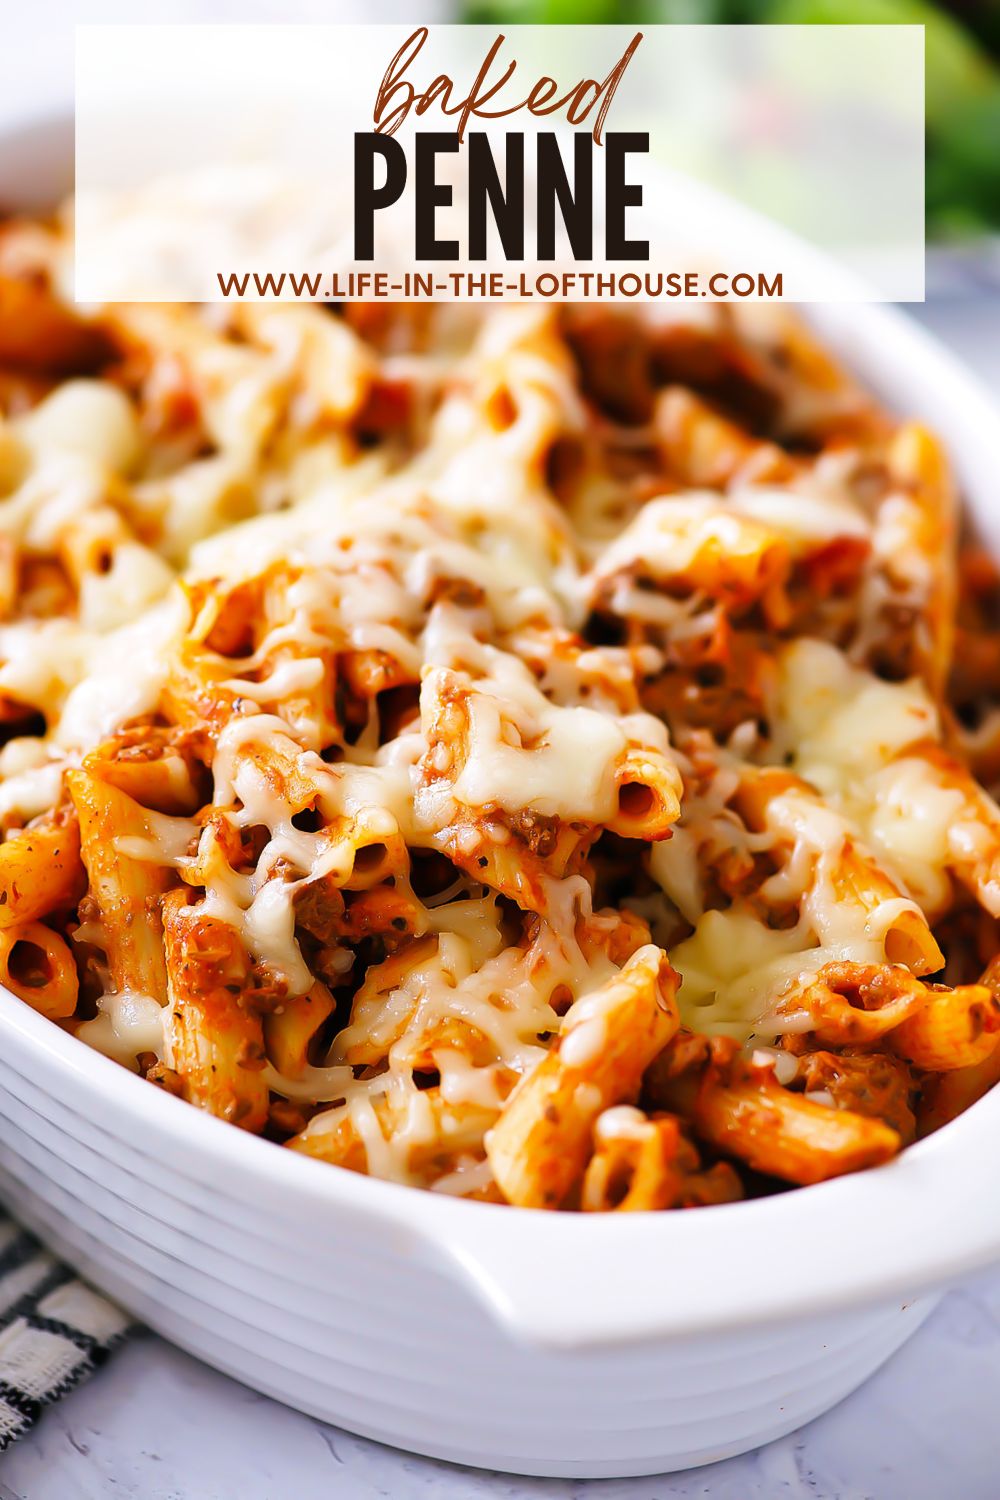 Baked Penne is a classic Italian-American dish with penne pasta baked in spaghetti sauce, cream cheese and Mozzarella cheese. Life-in-the-Lofthouse.com